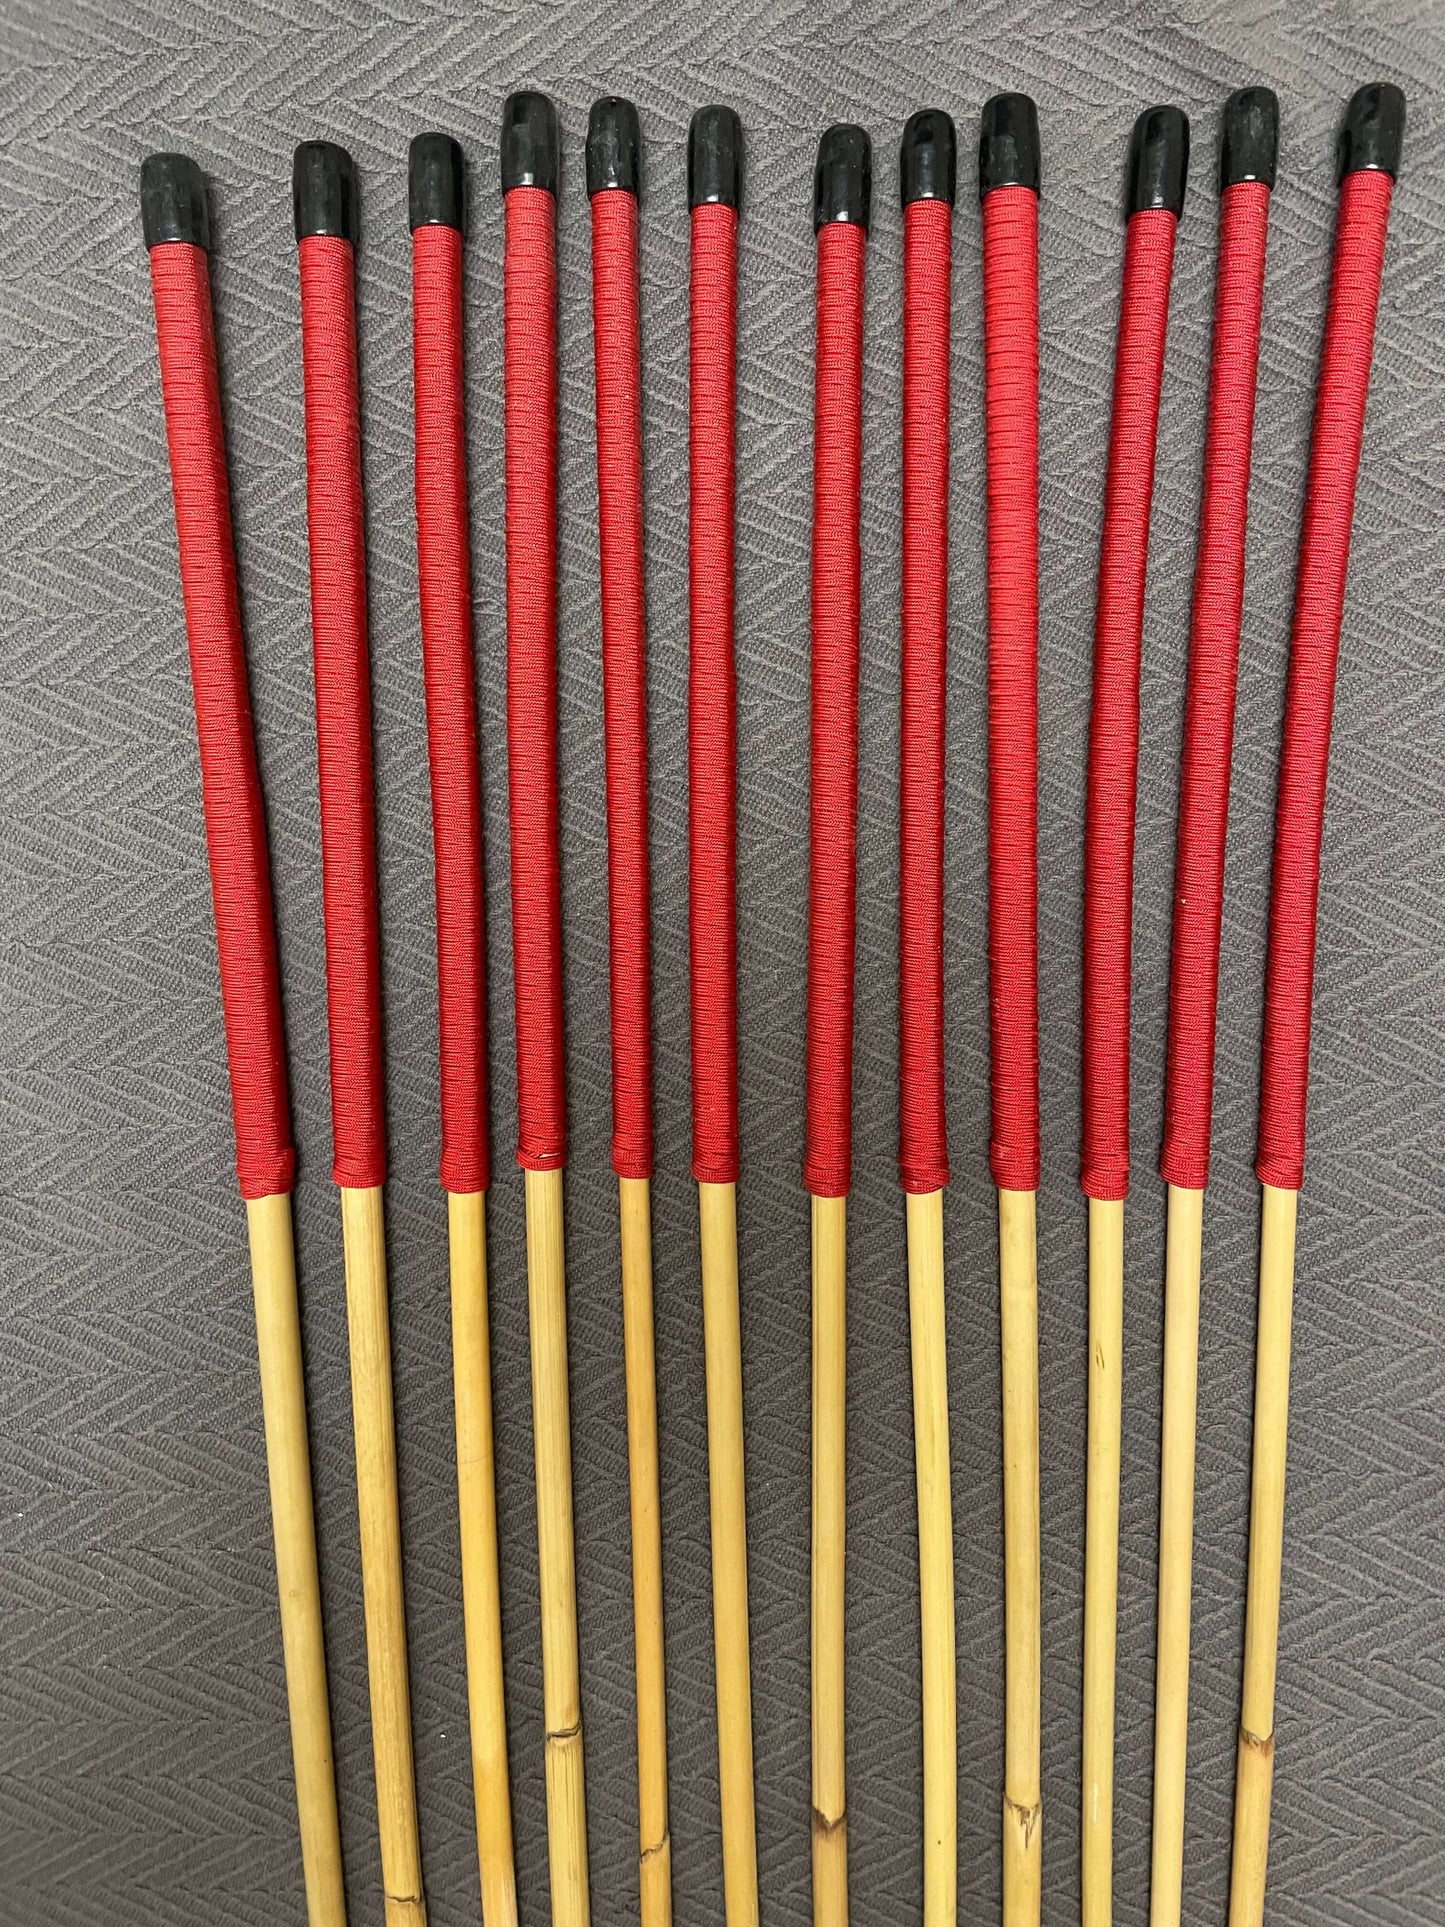 Set of 12 Dragon Rattan Canes / Punishment Canes wirh Red Paracord Handles